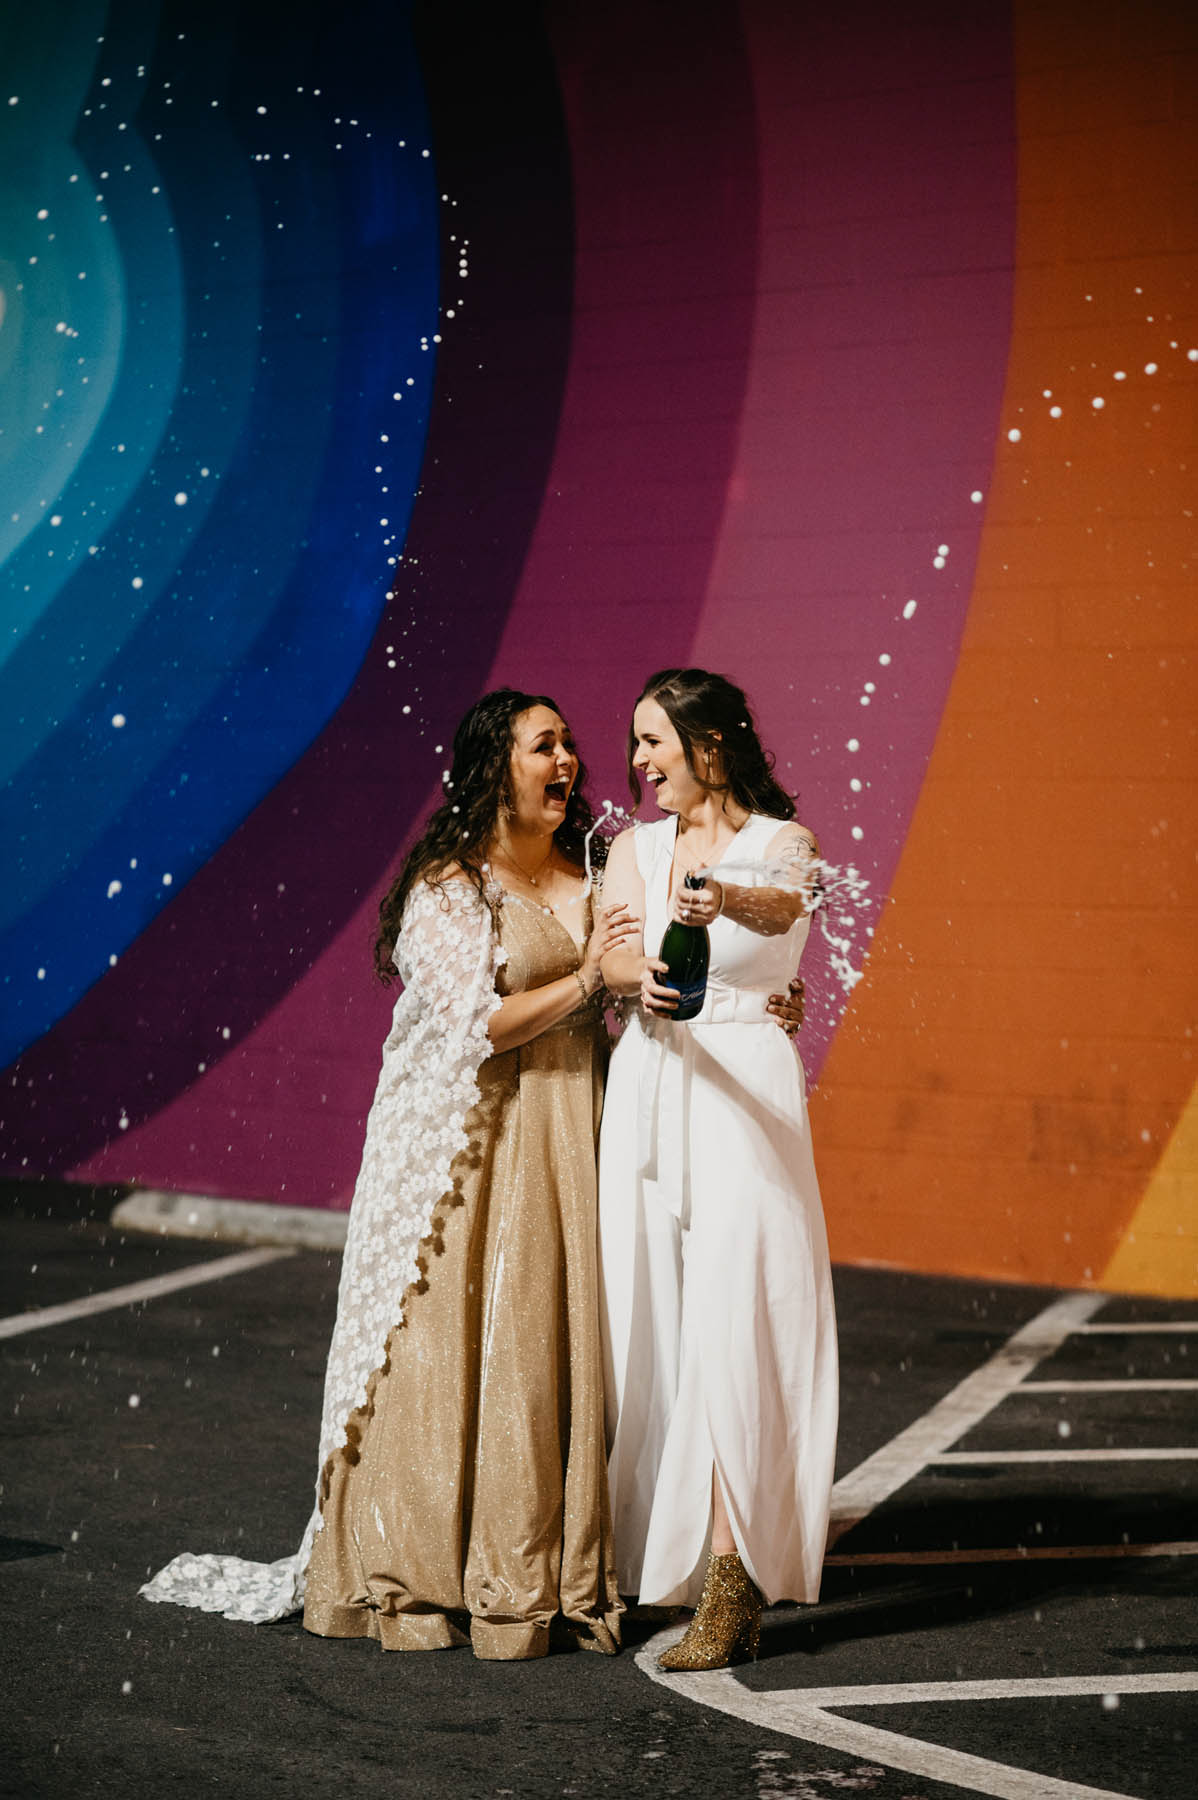 The newlyweds, both brunettes, stand in front of a rainbow color mural and pop a bottle of champagne.